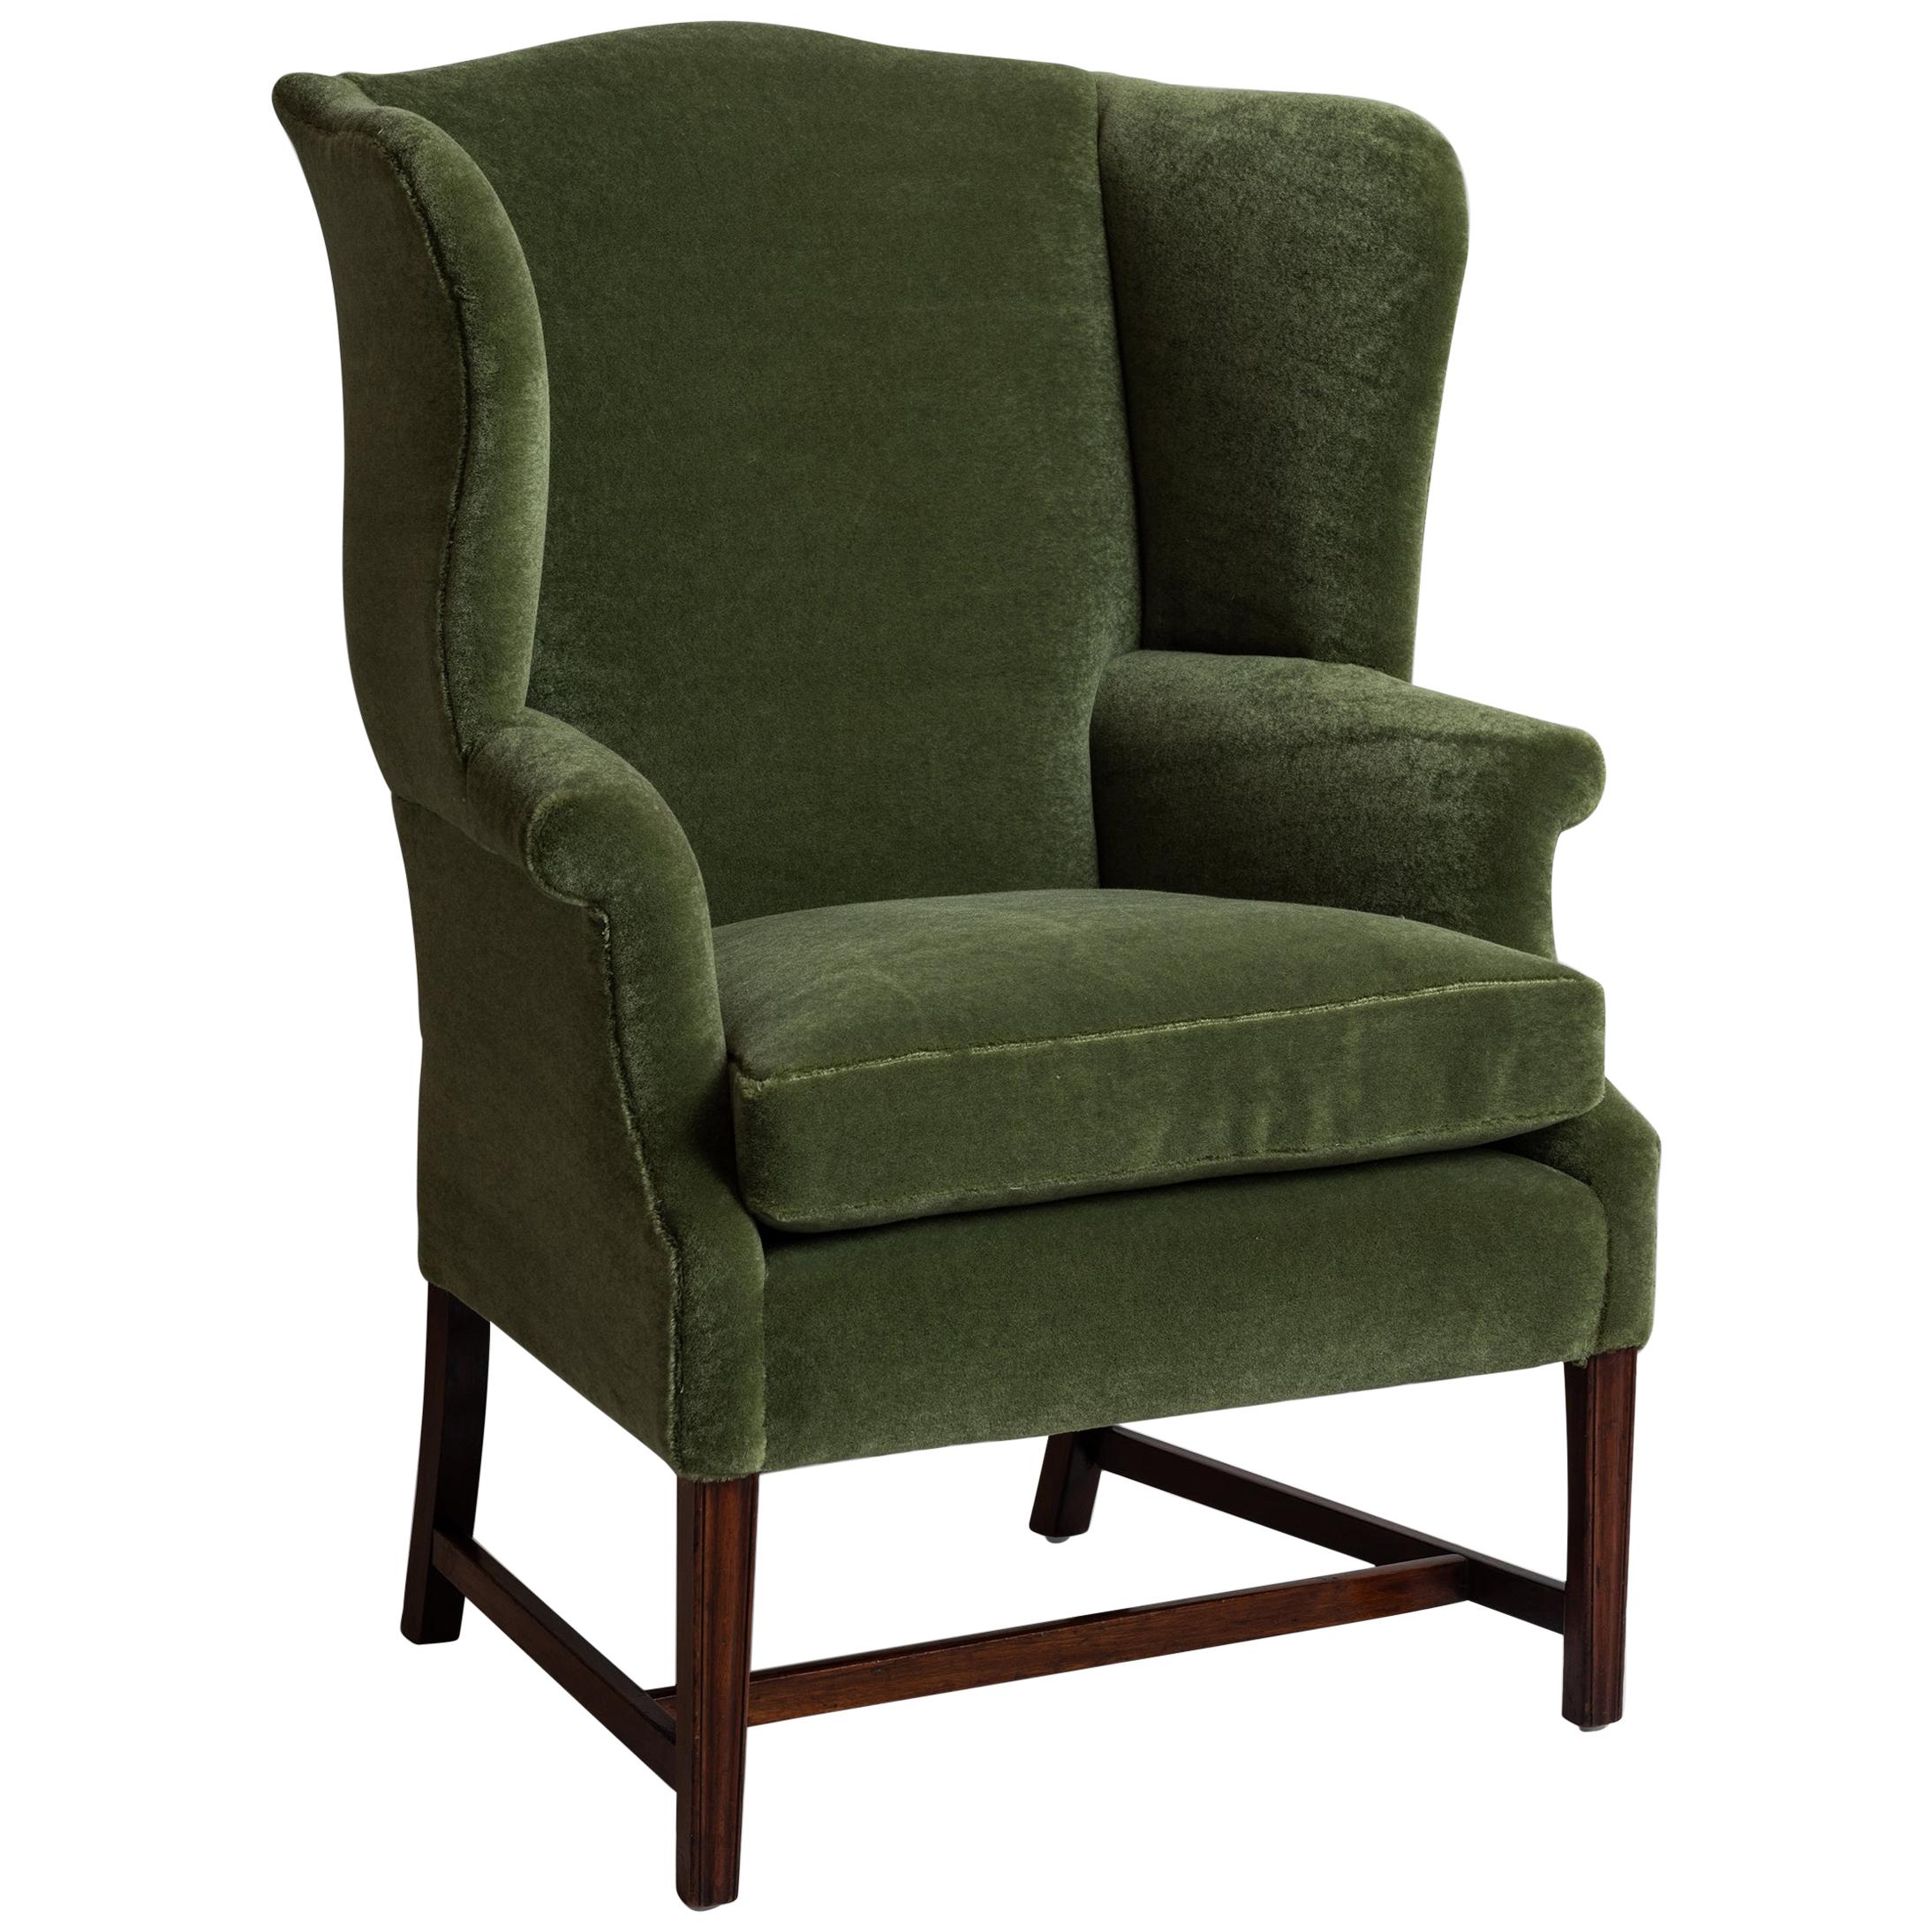 Wingchair in Teddy Mohair by Pierre Frey 'Mousse', England, circa, 1880